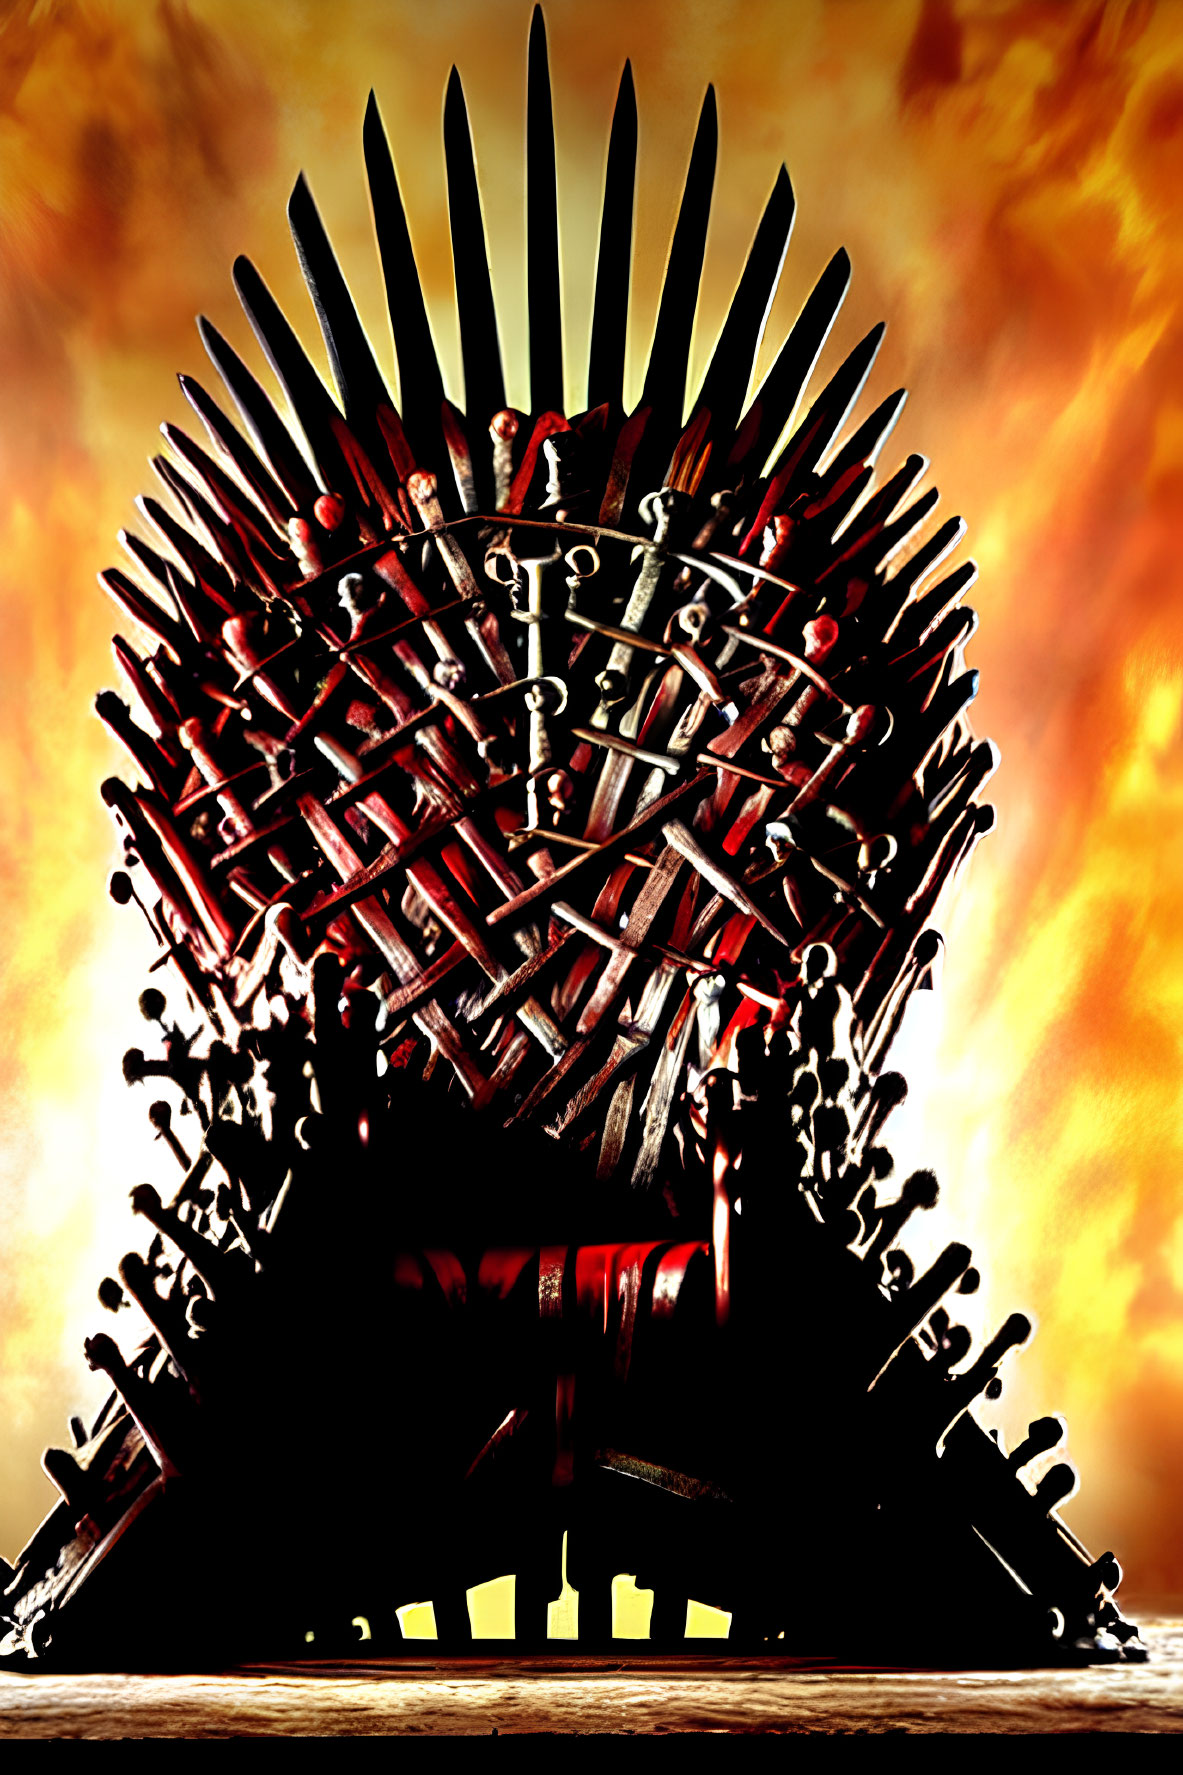 Iconic Iron Throne: Swords & Fiery Background for Game of Thrones Fans